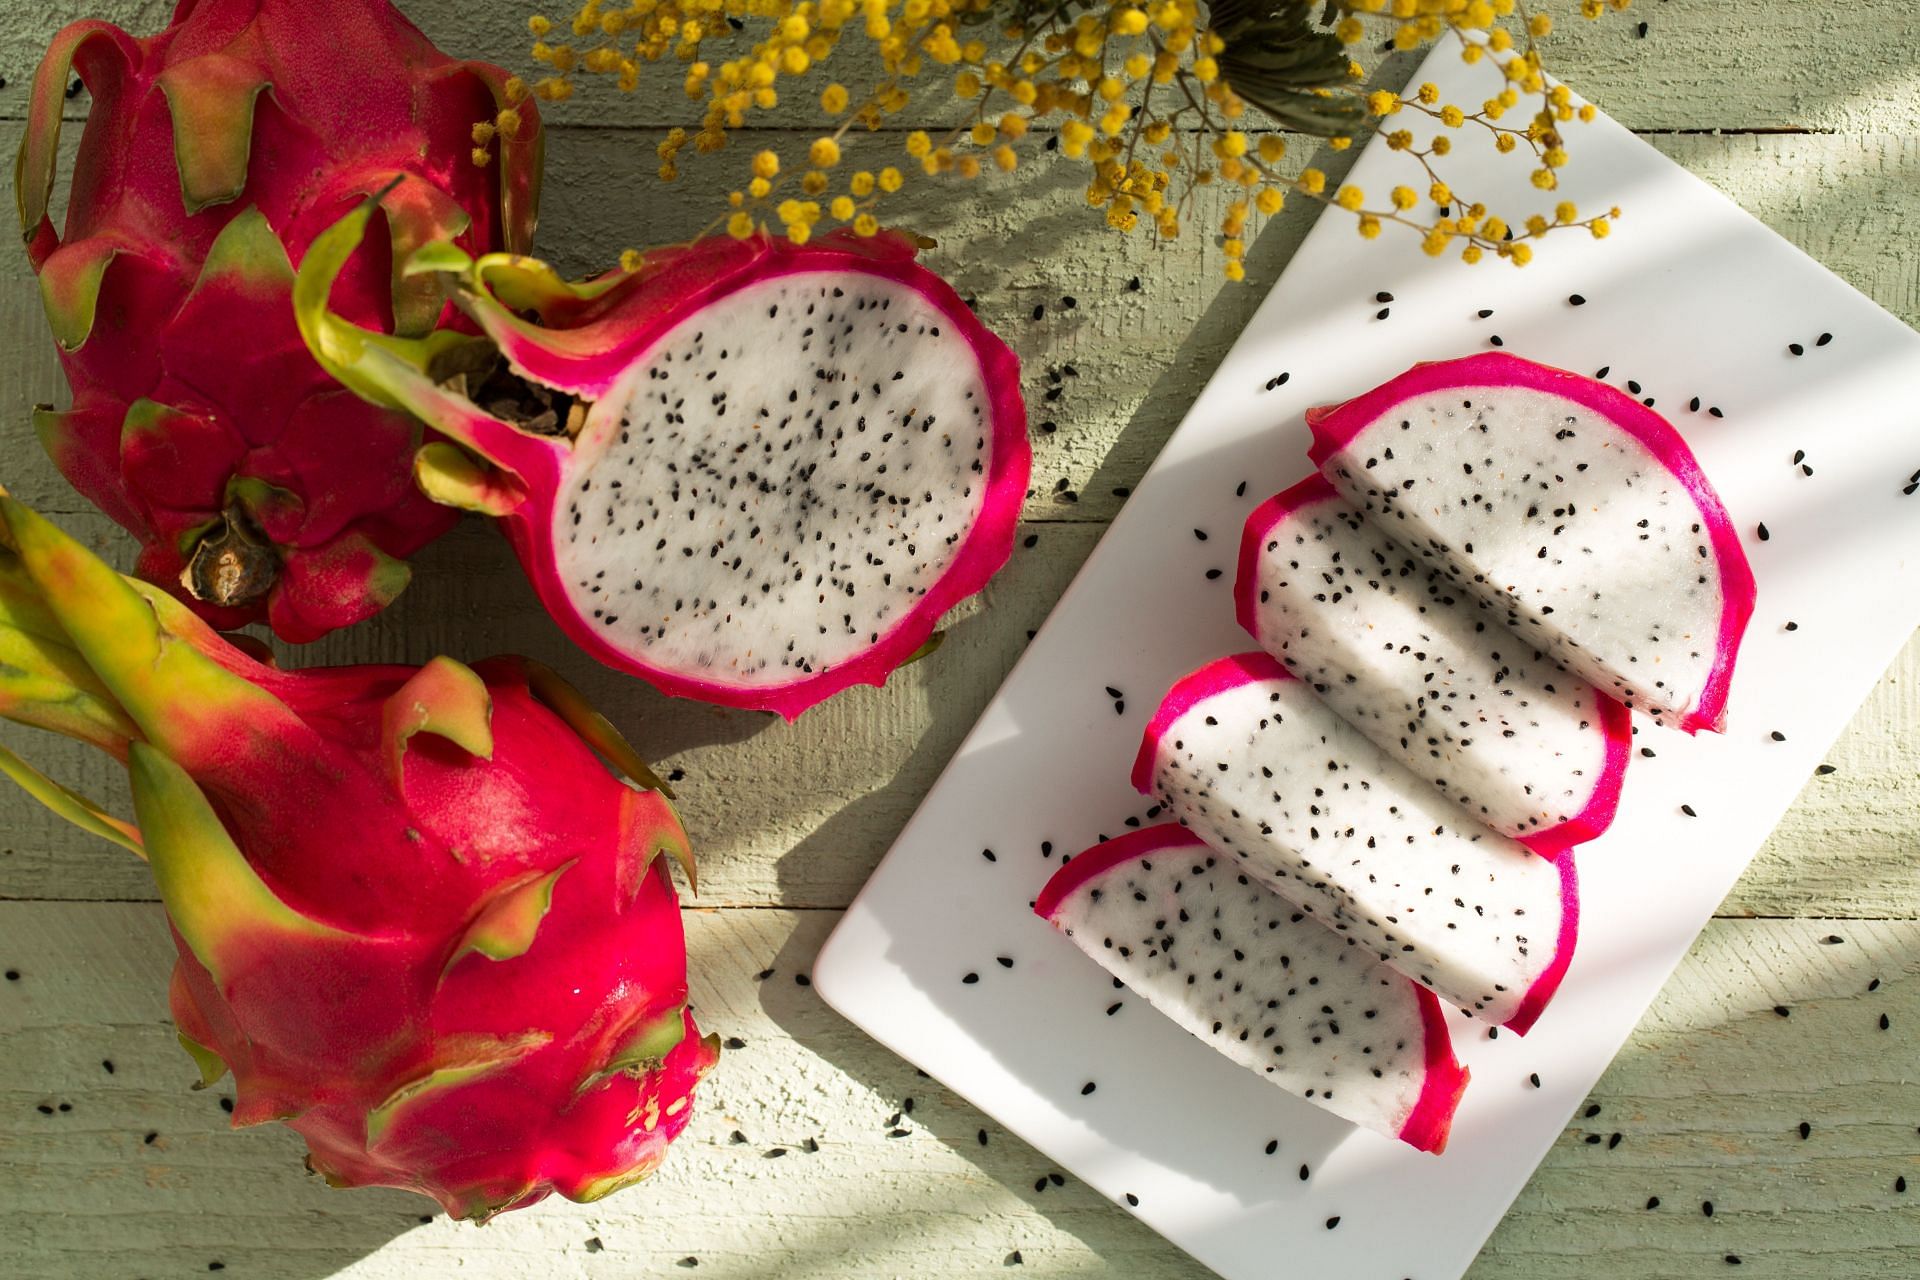 Dragon fruit is a tropical fruit with vibrant appearance and taste.(Image Via Pexels)